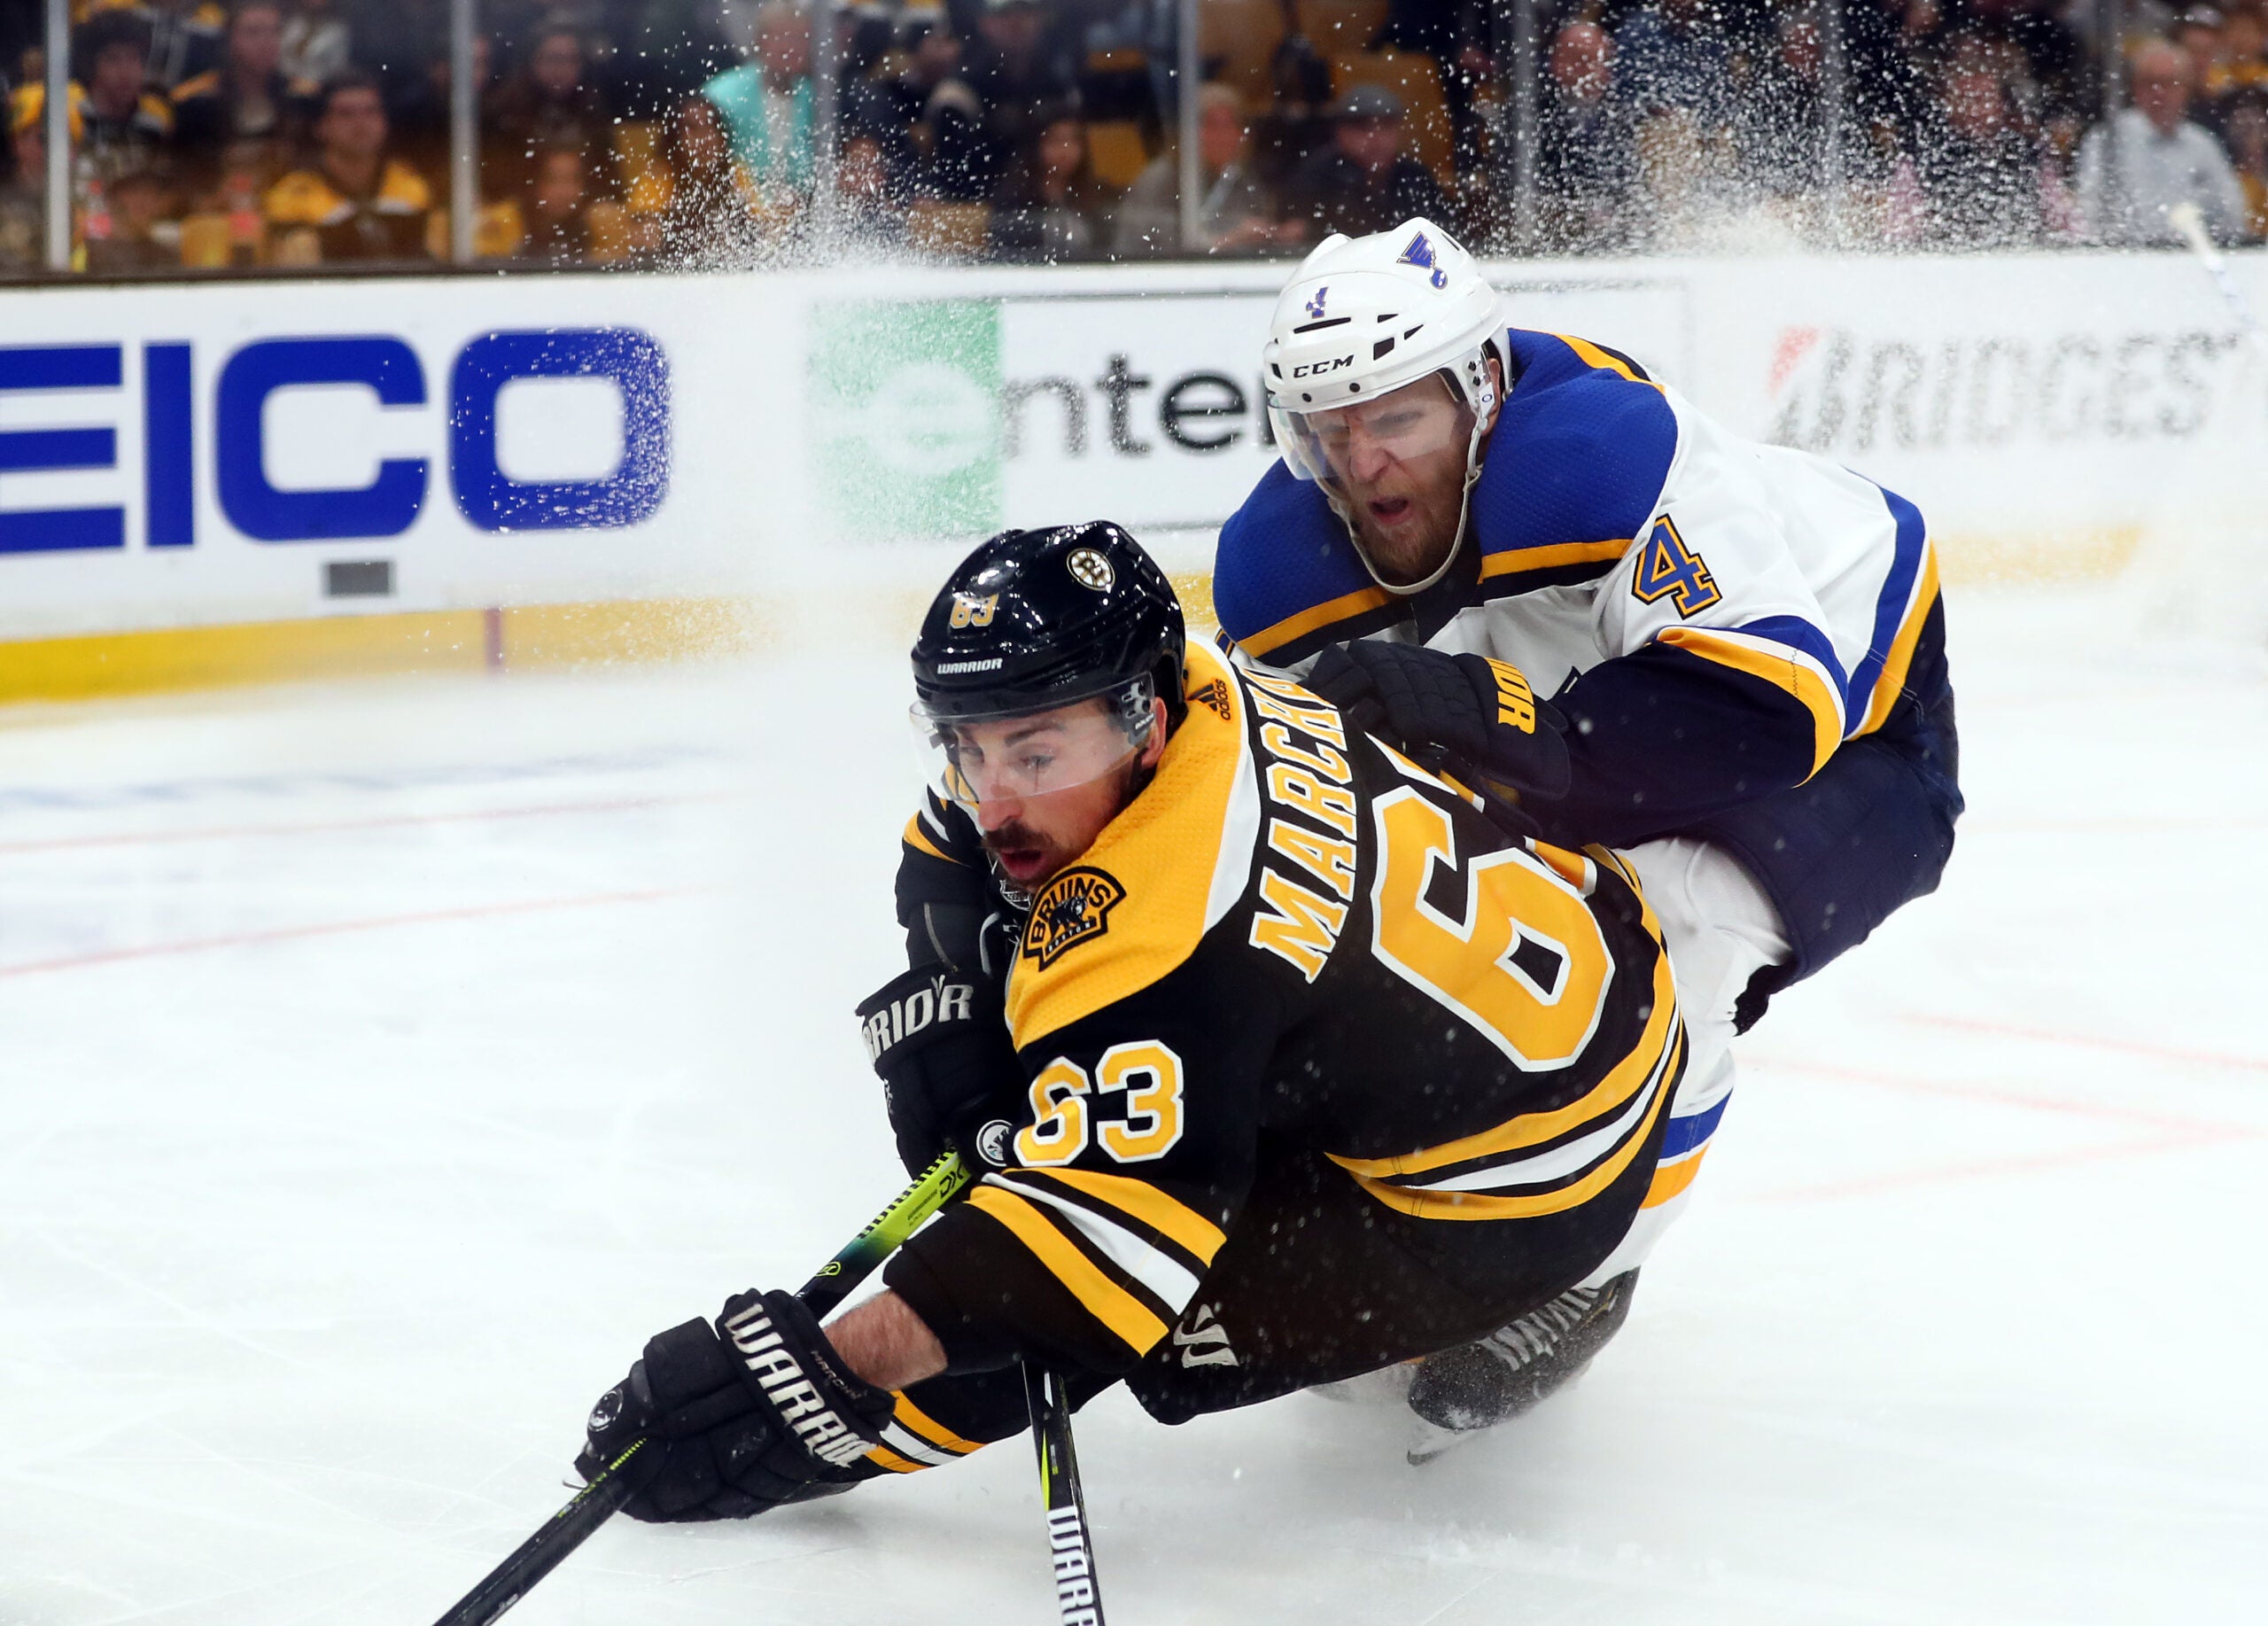 Blues top Bruins in Game 4, even Stanley Cup Final at 2-2